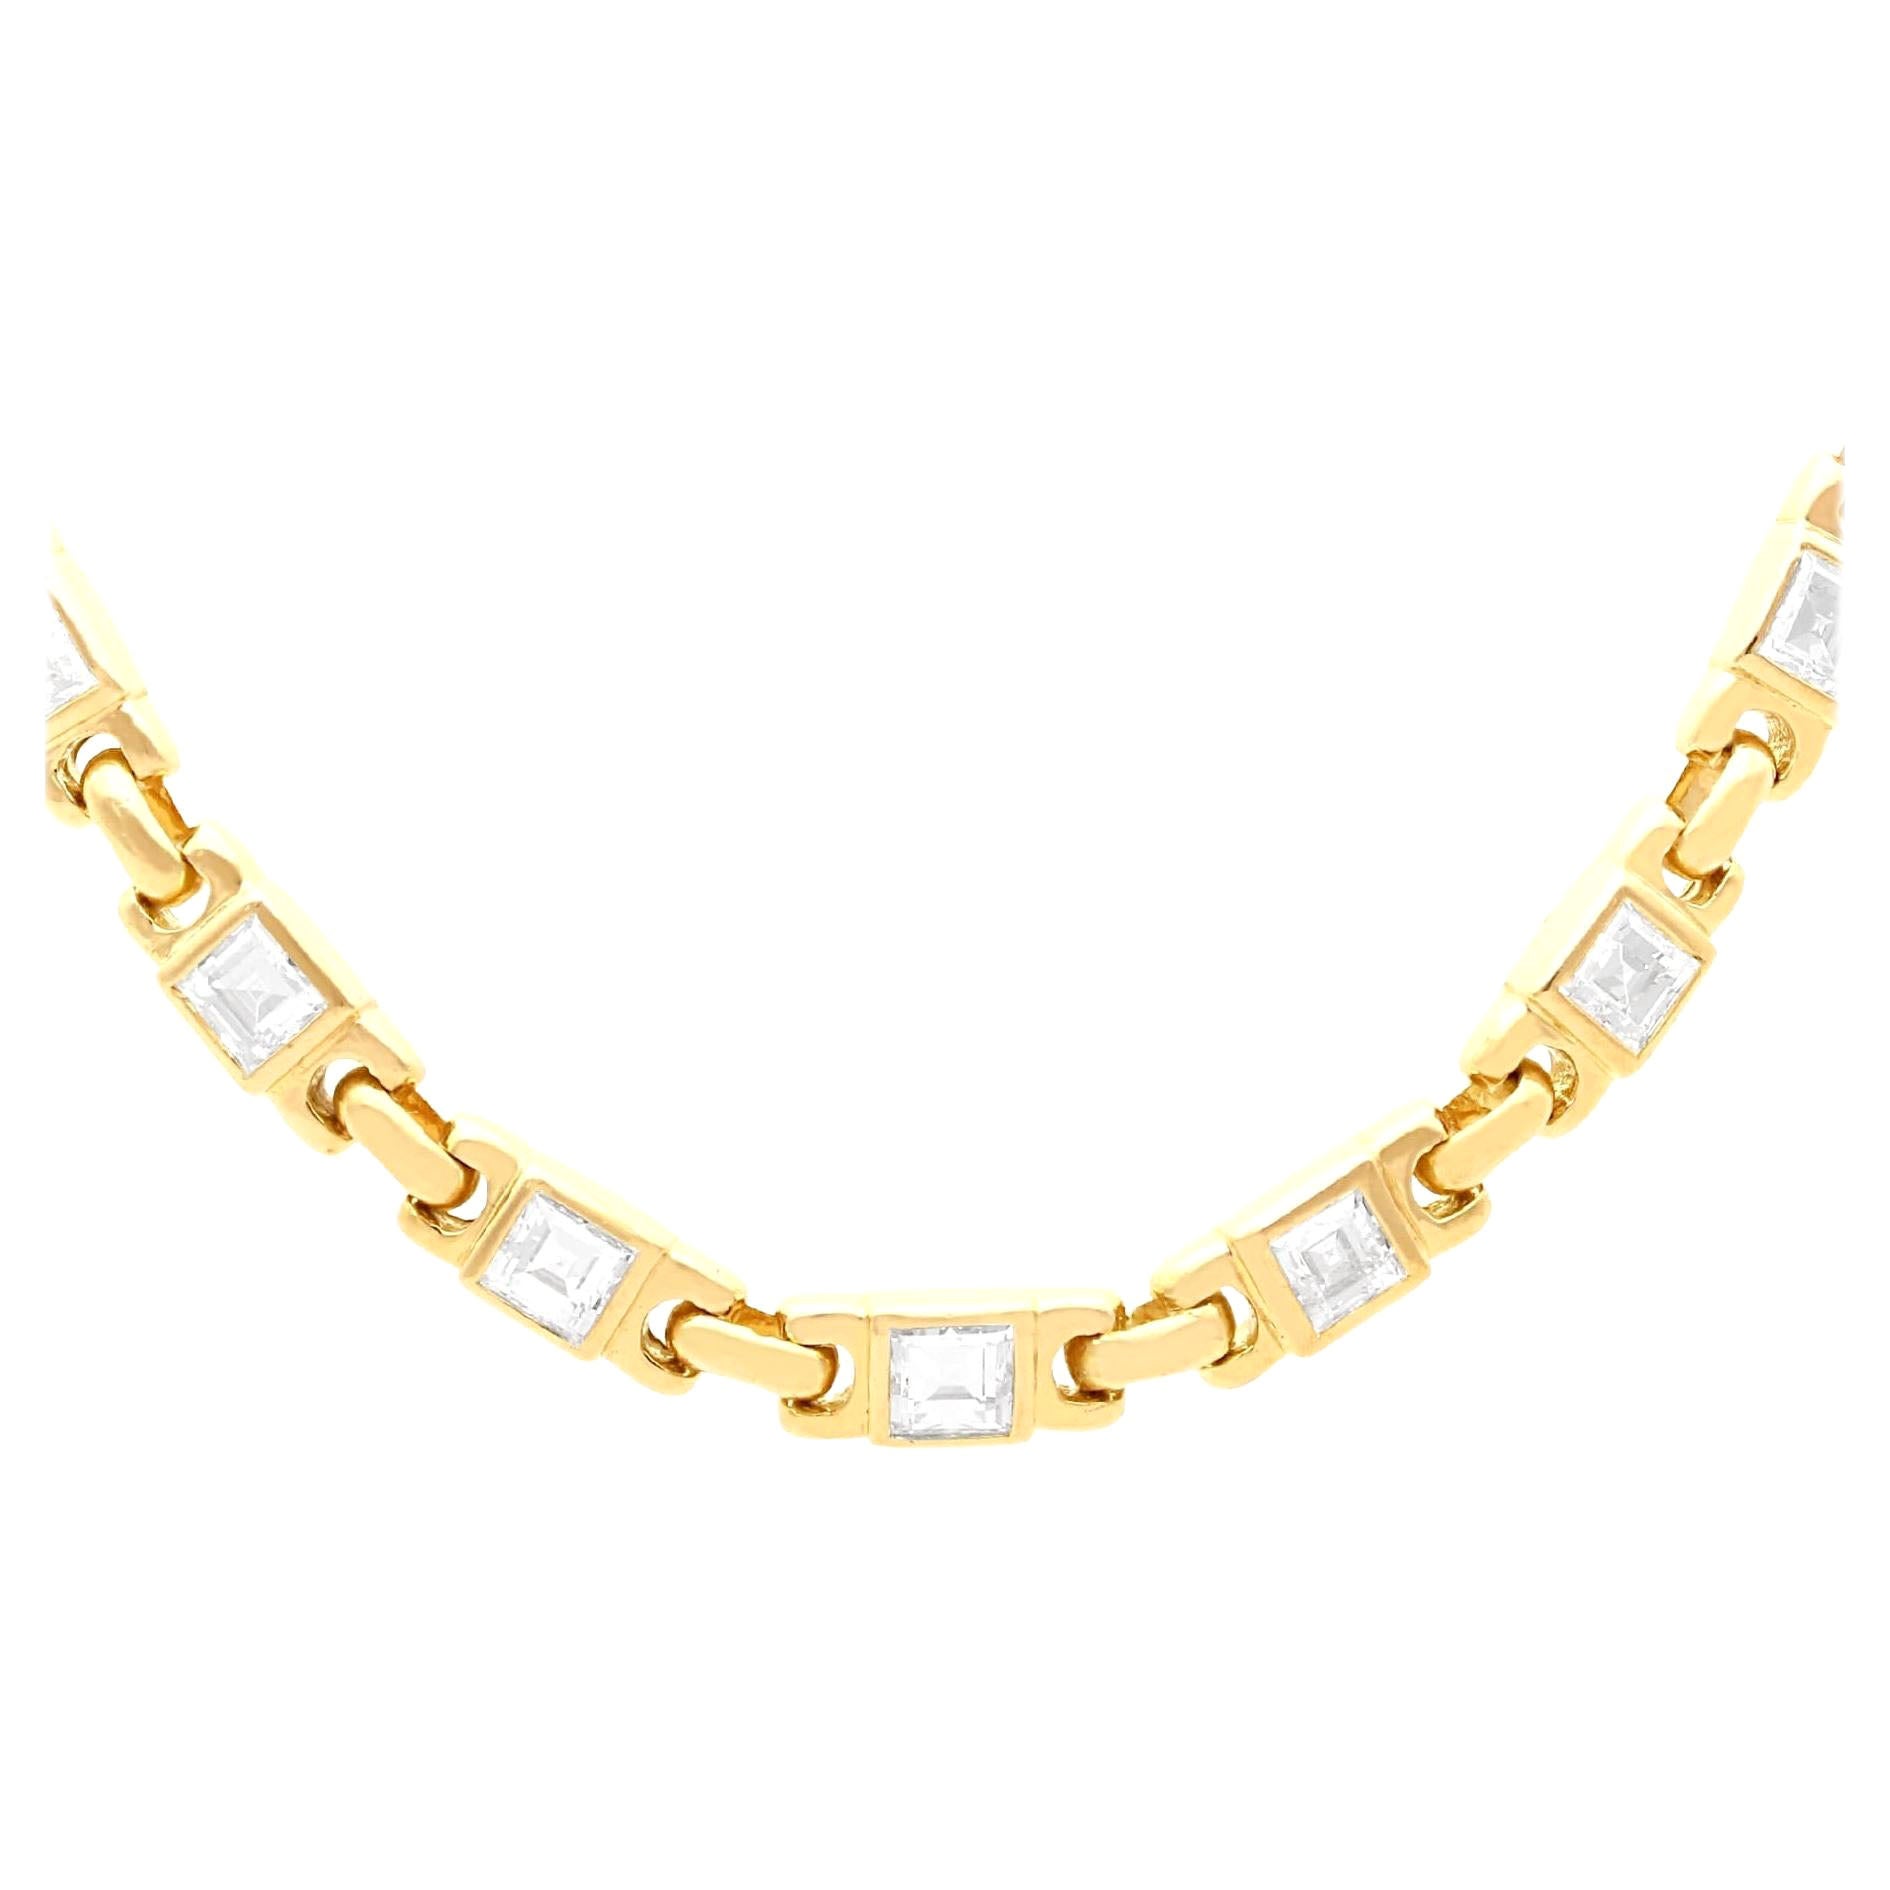 Vintage 3 Carat Diamond and 18K Yellow Gold Necklace